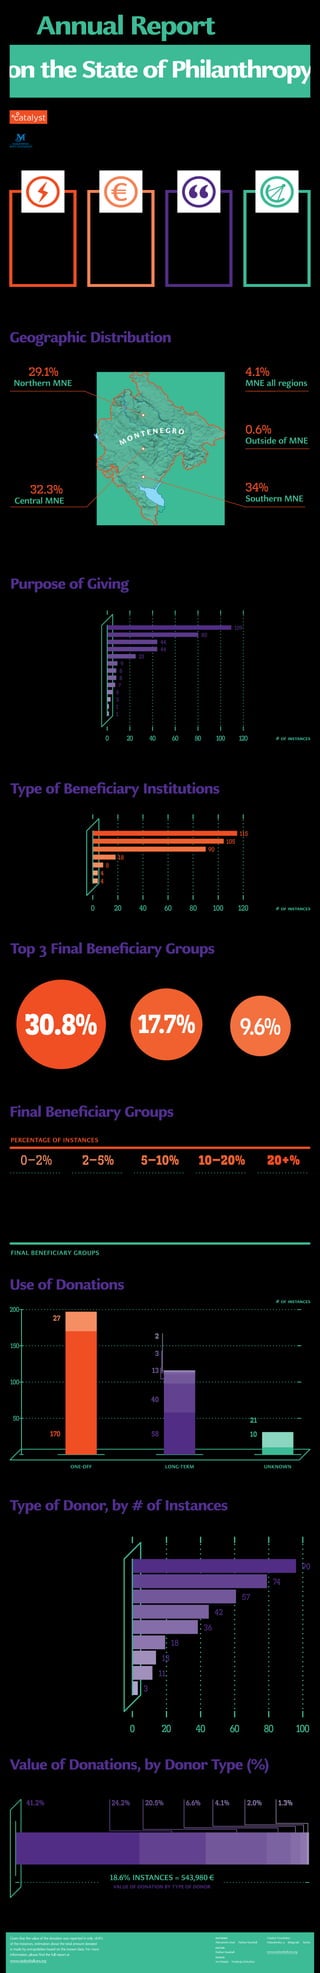 Geographic Distribution
Purpose of Giving
Type of Beneficiary Institutions
Top 3 Final Beneficiary Groups
Final Beneficiary Groups
Use of Donations
Type of Donor, by # of Instances
Value of Donations, by Donor Type (%)
Poverty Reduction
Supp. to marg. groups
Healthcare
Education
Other
Culture
Public Infrastructure
Environmental Protection
Community Development
Sport
Religion
Natural Disaster / Emergency Mgmt.
Not Specified
0 20 40 60 80 100 120
109
80
44
44
25
9
8
8
7
5
3
1
1
Institutions
Non-Profit Organizations
Individuals / Families
Local / National Authorities
Other
Religious Communities
Unknown
0 20 40 60 80 100 120
115
105
90
18
8
4
4
0–2% 2–5% 5–10% 10–20% 20+%
Religious communities
Talented children and
youth
Refugees and internally
displaced persons
Elderly
Mothers and
newborns
Unknown
Children and adults
with developmental
disabilities
Children and youth
without parental care
General population
Minorities
Mixed and Other
Children and adults
with physical
disabilities
Residents of a specific
community
People with health
problems
Children and youth Economically
vulnerable
PERCENTAGE OF INSTANCES
FINAL BENEFICIARY GROUPS
27
Humanitarian
Aid
2
Research and Develop.
3
Scholarships
13
Services
40
Capital Investments
58
Equipment
21
General Support
10
Unknown
170
Supplies and
Consumables
50
100
150
200
ONE-OFF LONG-TERM UNKNOWN
Companies
Mixed Donors
Mass Individual
Associations
Individuals
SMEs
Private Foundations
Unknown
Religious Communities
0 20 40 60 80 100
90
74
57
42
36
18
11
13
3
41.2%
Companies
24.2%
SMEs
20.5%
Individuals
6.6%
Mixed
Fonors
4.1%
Associations
2.0%
Private
foundations
1.3%
Mass
Inddivual
18.6% INSTANCES = 543,980 €
VALUE OF DONATION BY TYPE OF DONOR
Catalyst Foundation
Makedonska 21  Belegrade Serbia
www.catalystbalkans.org
authors
Aleksandra Vesić  Nathan Koeshall
editor
Nathan Koeshall
design
Ivo Matejin  Fondacija Dokukino
Annual Report
on the State of Philanthropy
673 252.9
million
344
# of instances
recorded
# of articles
indexed
# of media
outlets indexed
total value
of donations
M
O N T E N E G R O
29.1%
Northern MNE
4.1%
MNE all regions
32.3%
Central MNE
0.6%
Outside of MNE
34%
Southern MNE
Given that the value of the donation was reported in only 18.6%
of the instances, estimation about the total amount donated
is made by extrapolation based on the known data. For more
information, please find the full report at
www.catalystbalkans.org
# of instances
# of instances
# of instances
During 2013, Catalyst tracked media reports on domestic individual, corporate and diaspora philanthropy
in Montenegro. This brochure provides key statistics on the findings of this research.
Data Powered By
Financial Support From
Montenegro 2013
 